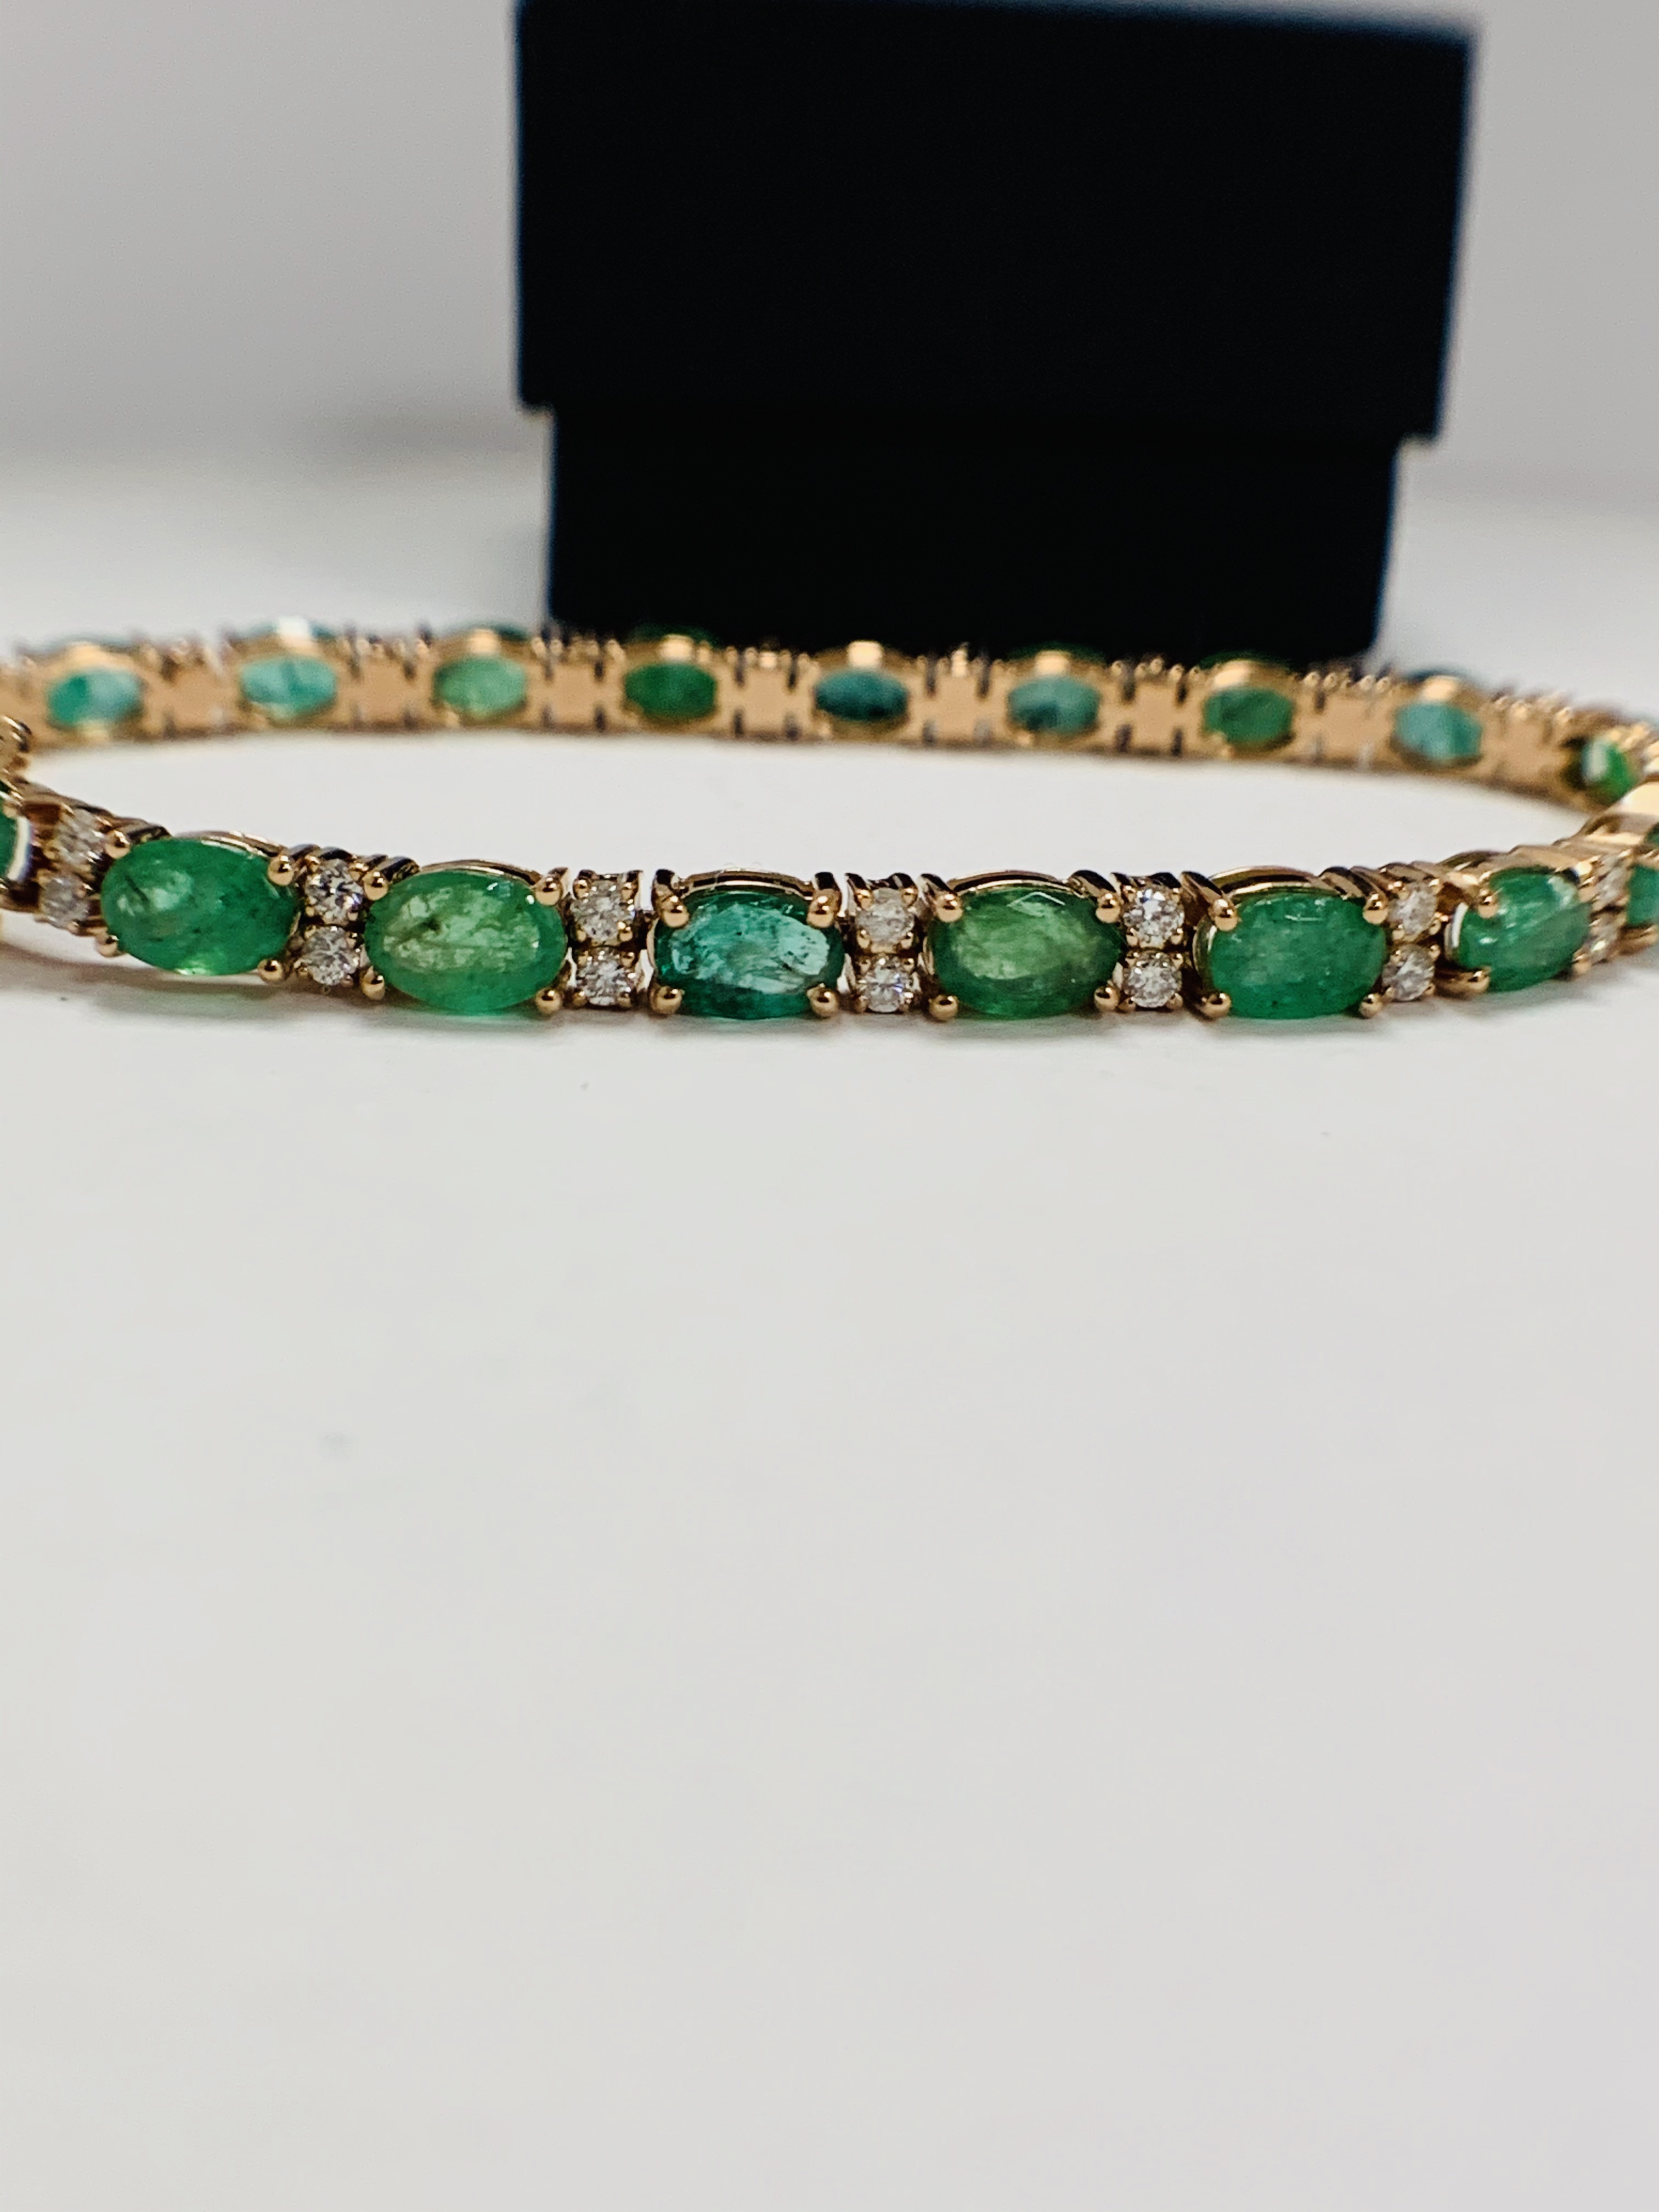 14ct Rose Gold Emerald and Diamond bracelet featuring, 21 oval cut, light green Emeralds (9.03ct TSW - Image 6 of 19